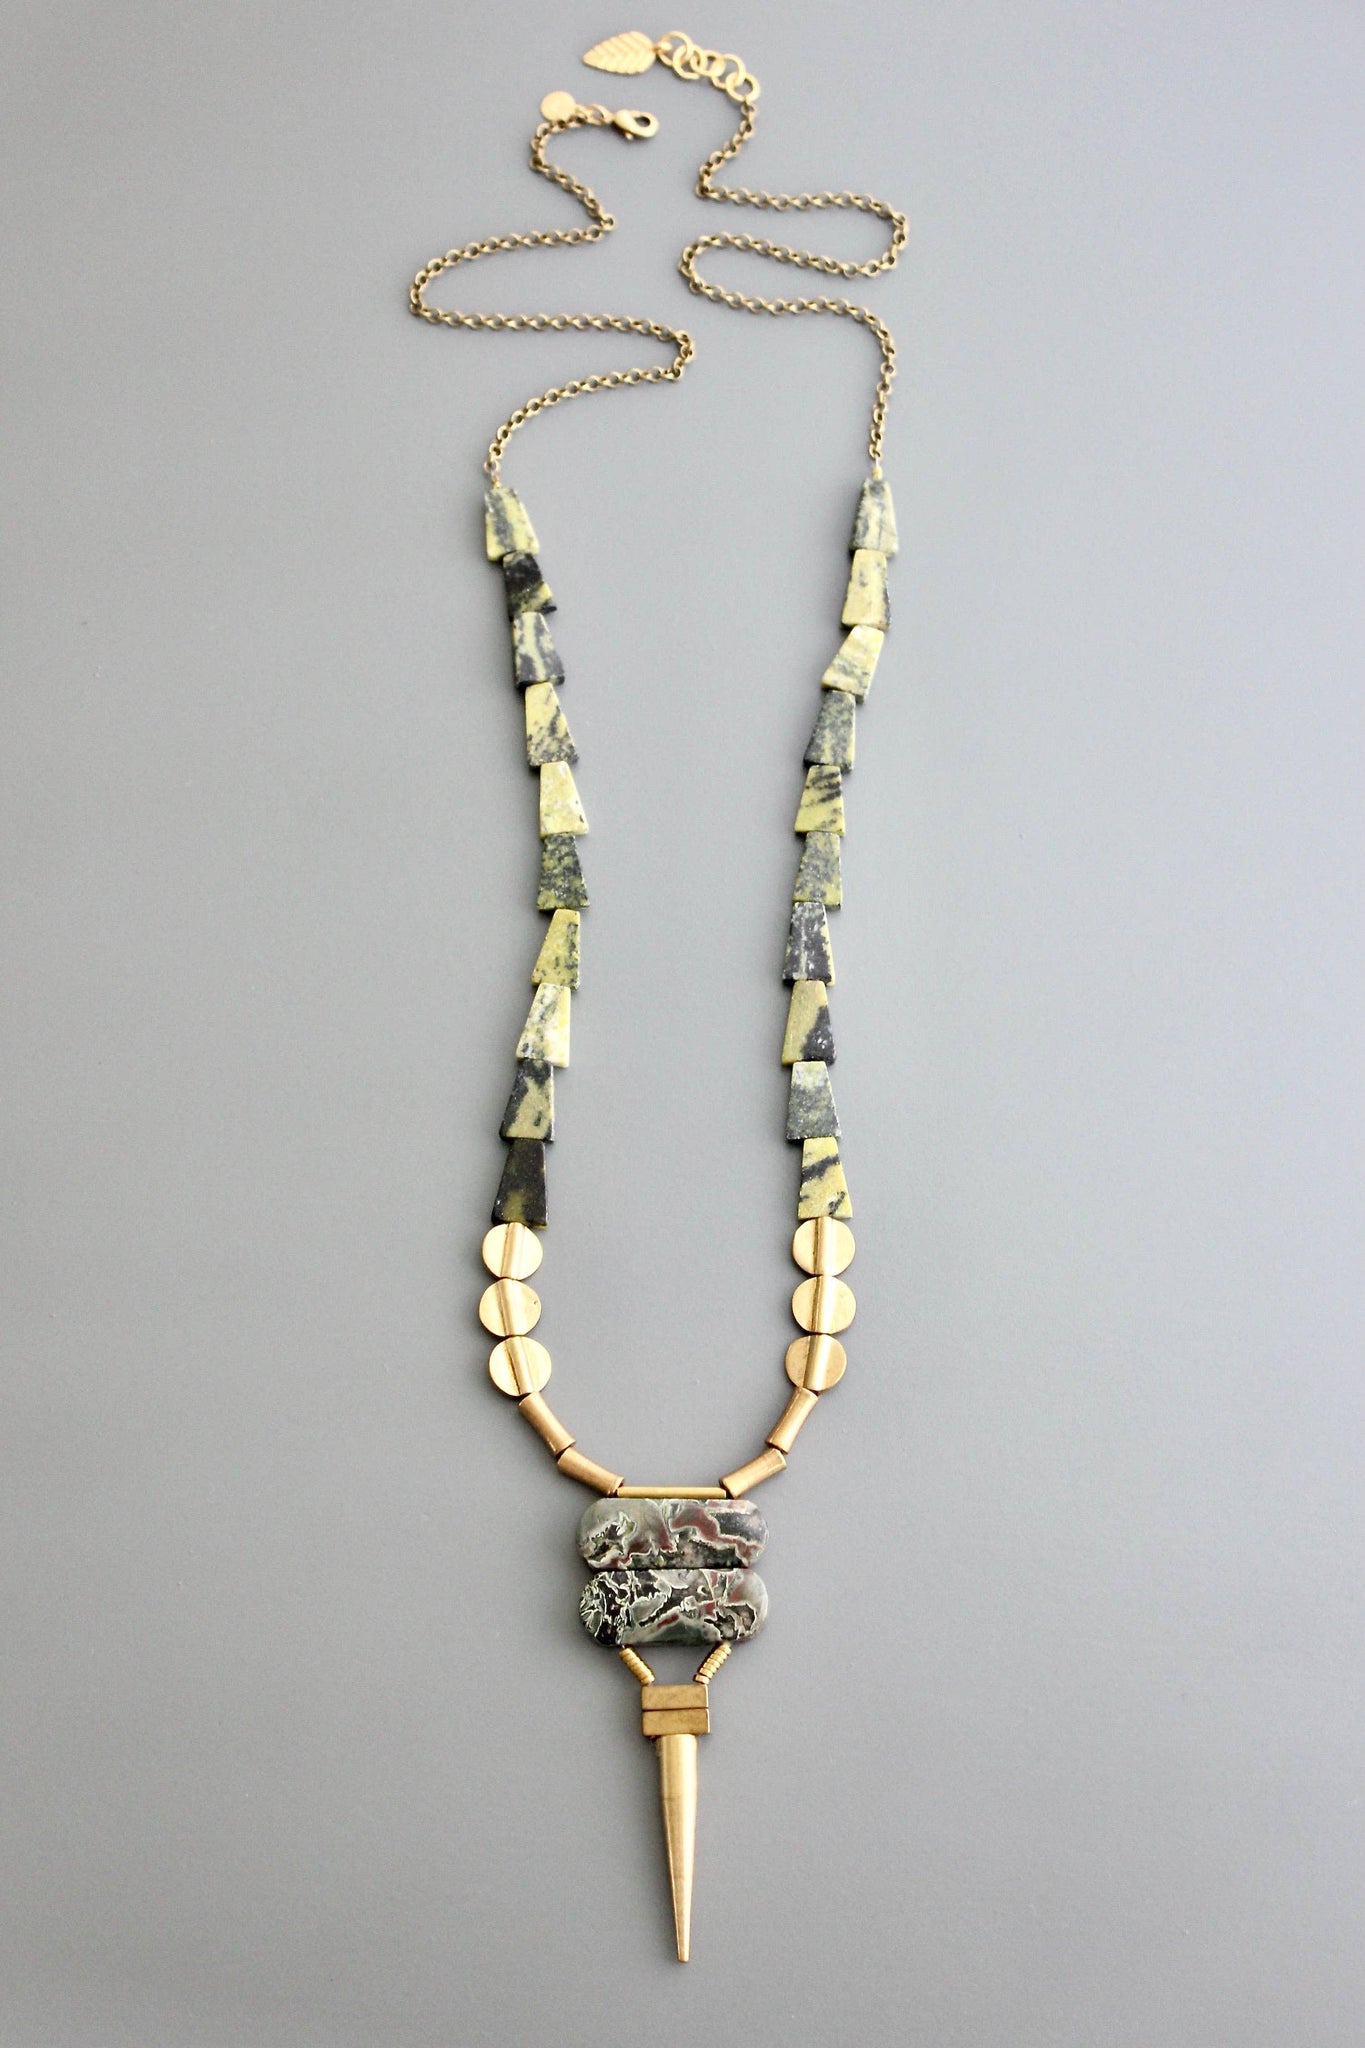 Serpentine and jade necklace